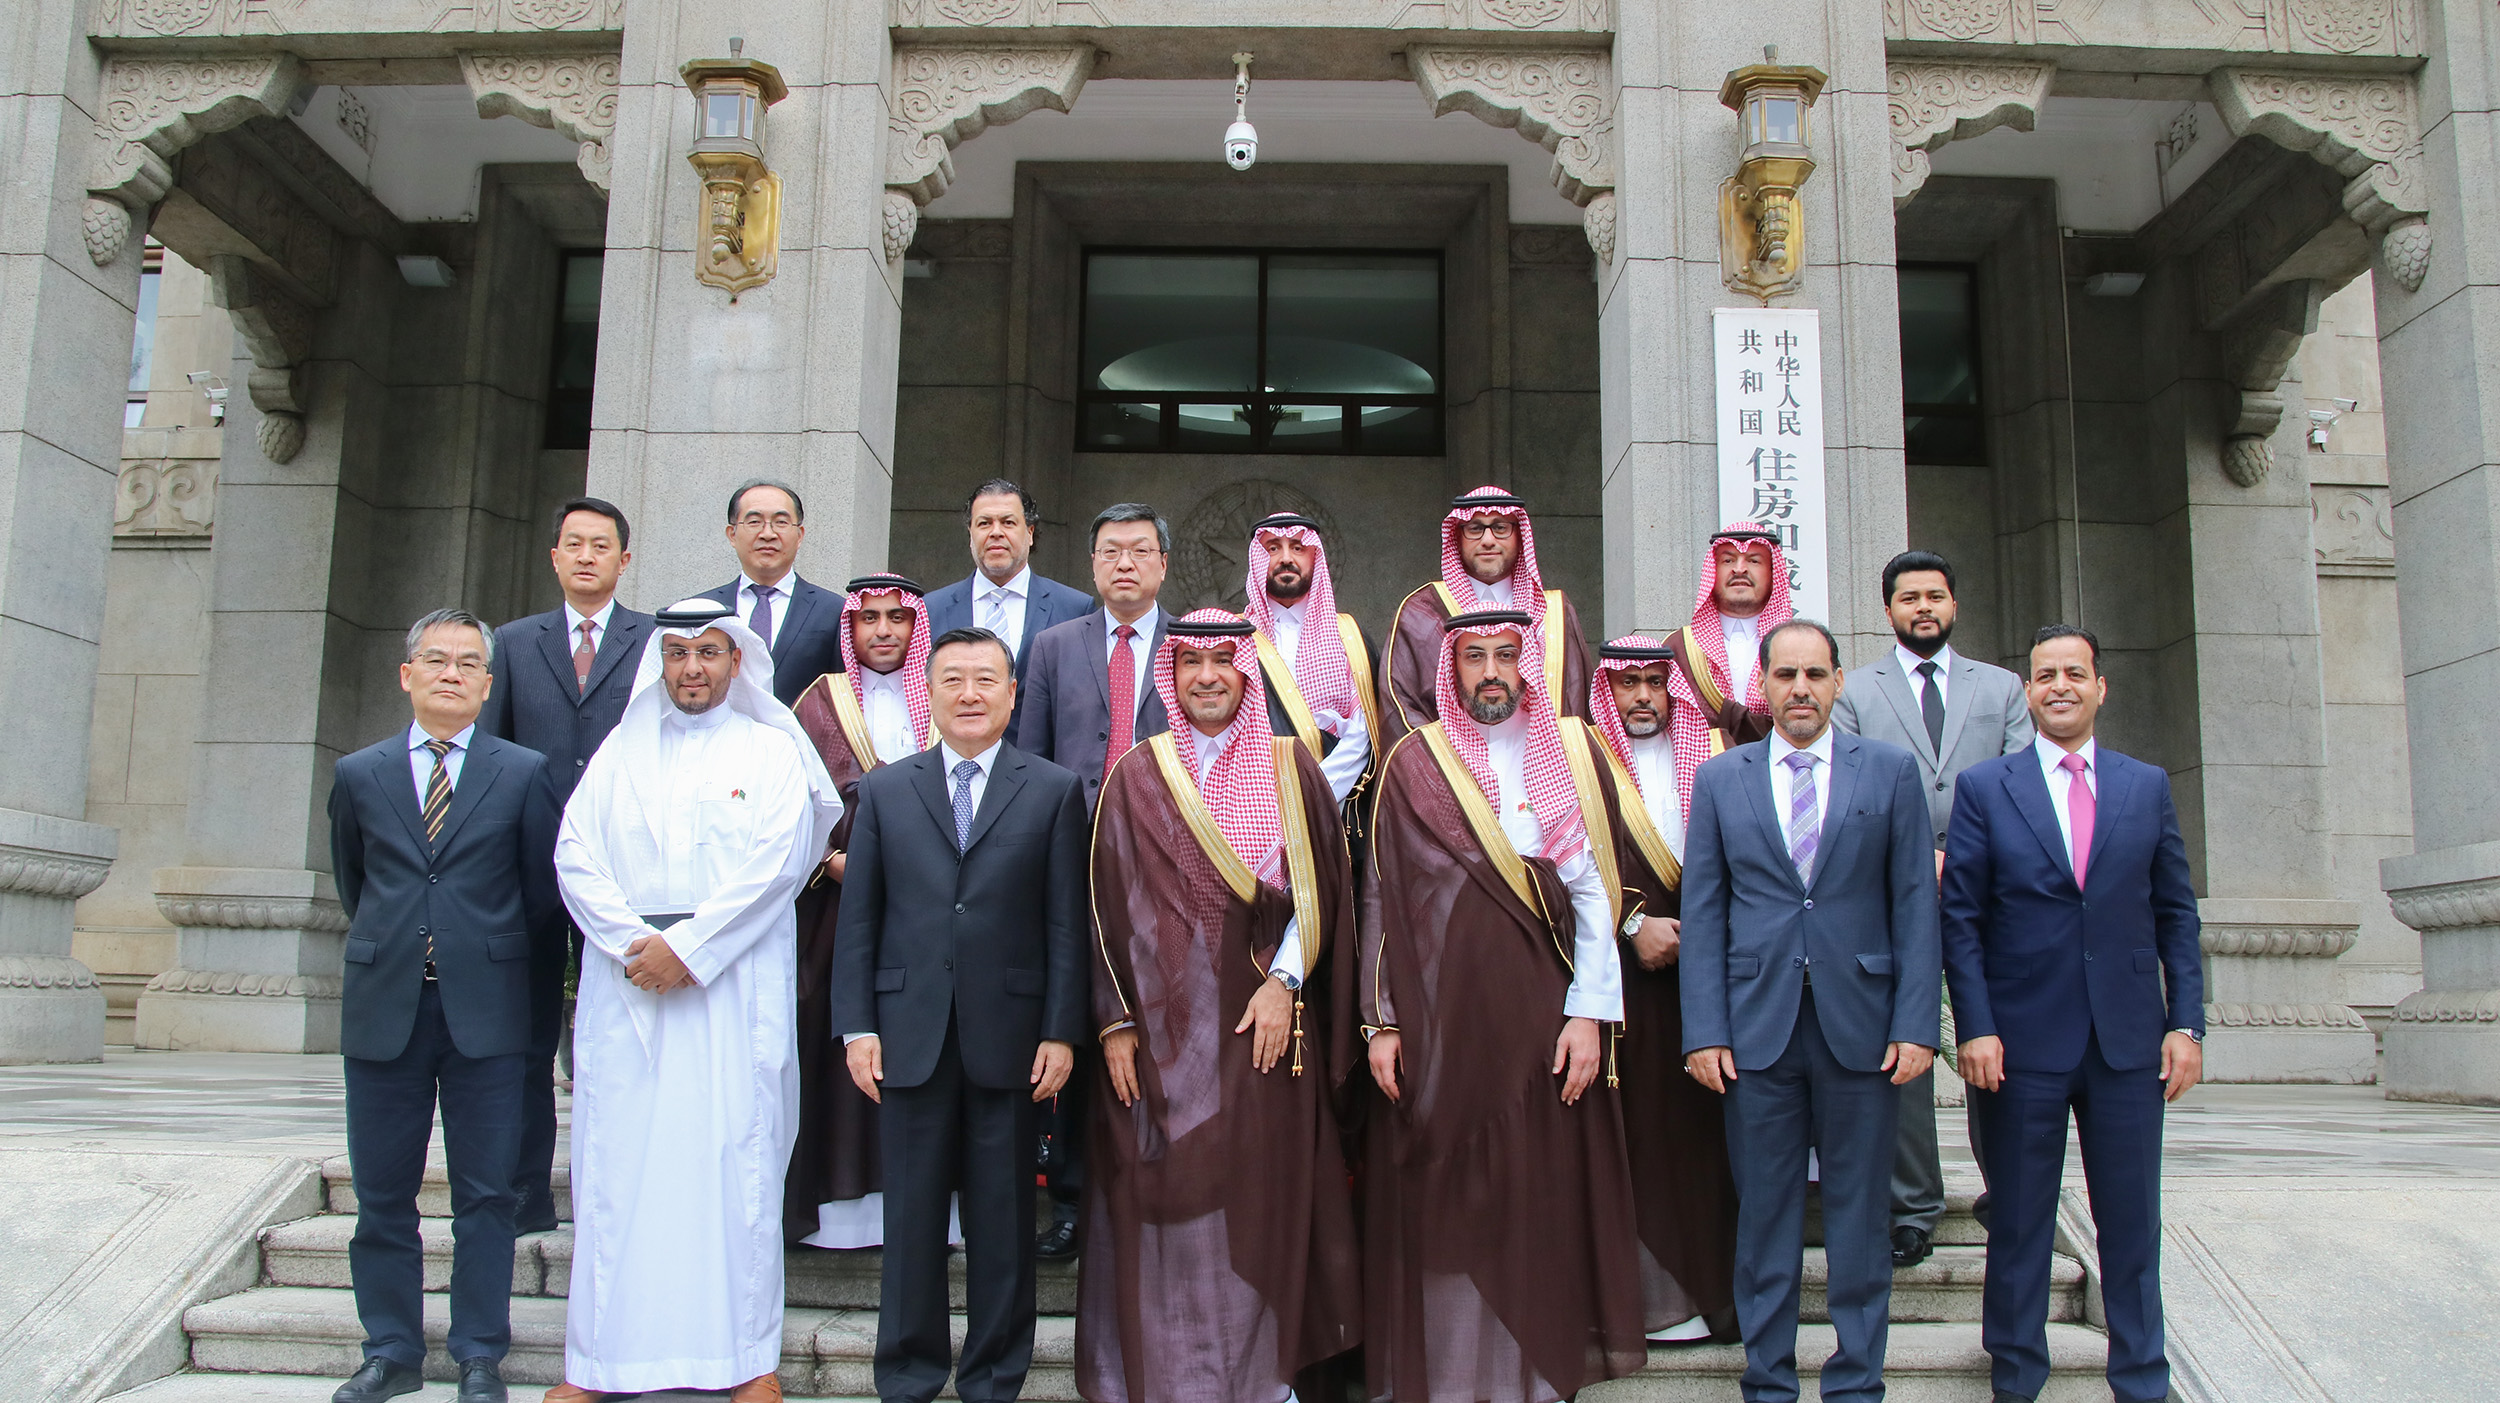 Al-Hogail concludes his official visit to Beijing, and witnesses the signing of agreements to attract a group of Chinese construction and contracting companies to Riyadh